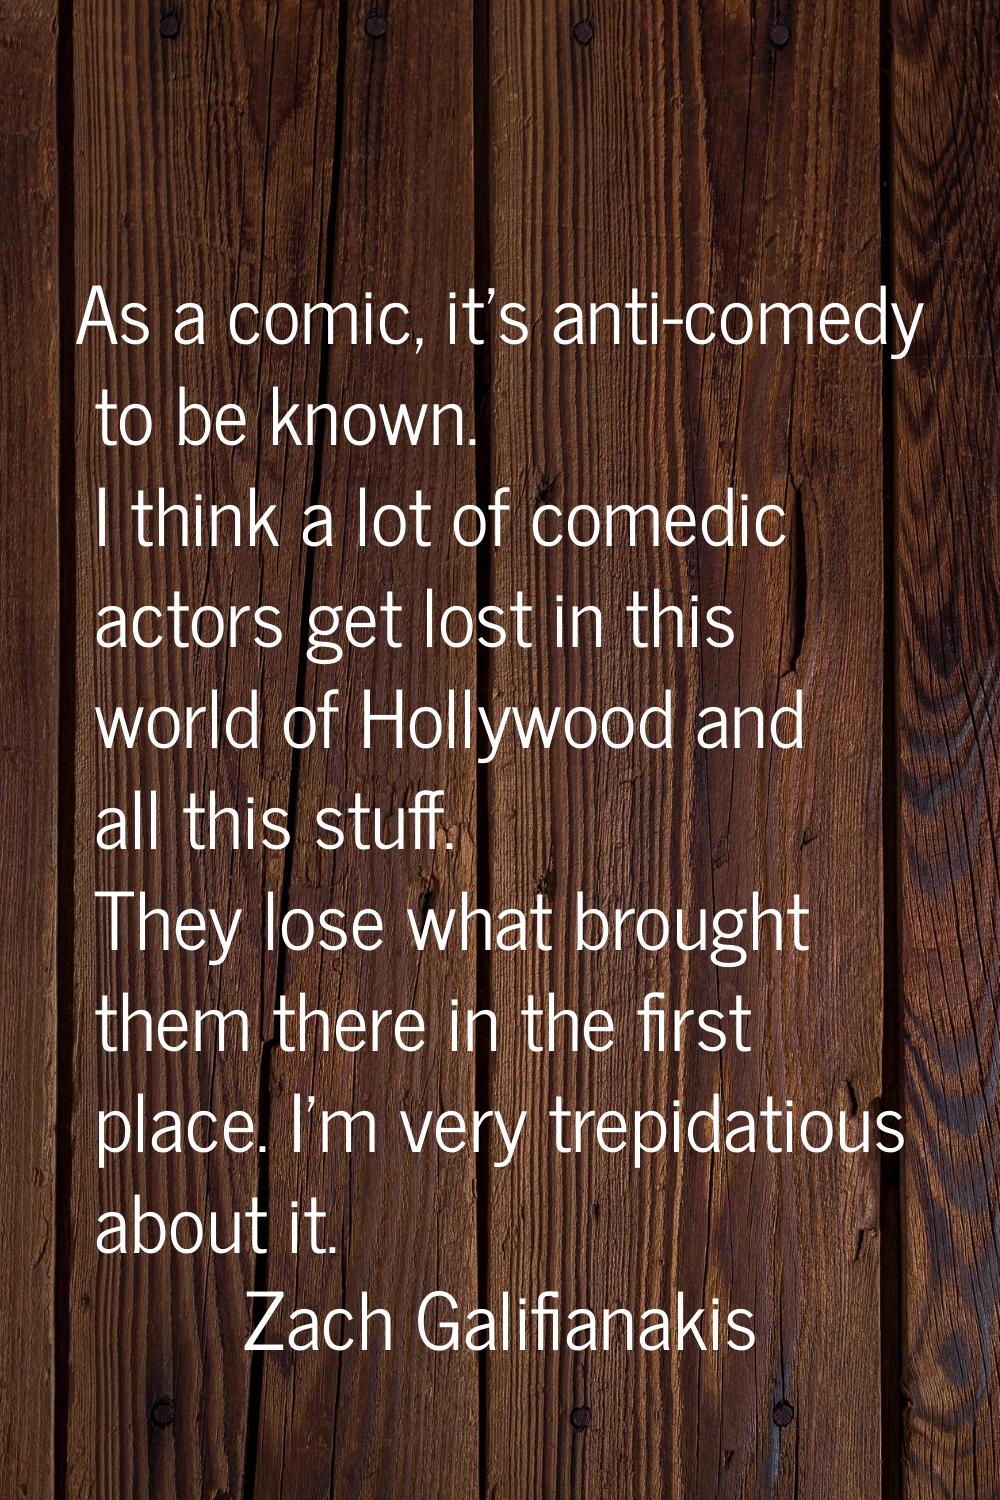 As a comic, it's anti-comedy to be known. I think a lot of comedic actors get lost in this world of